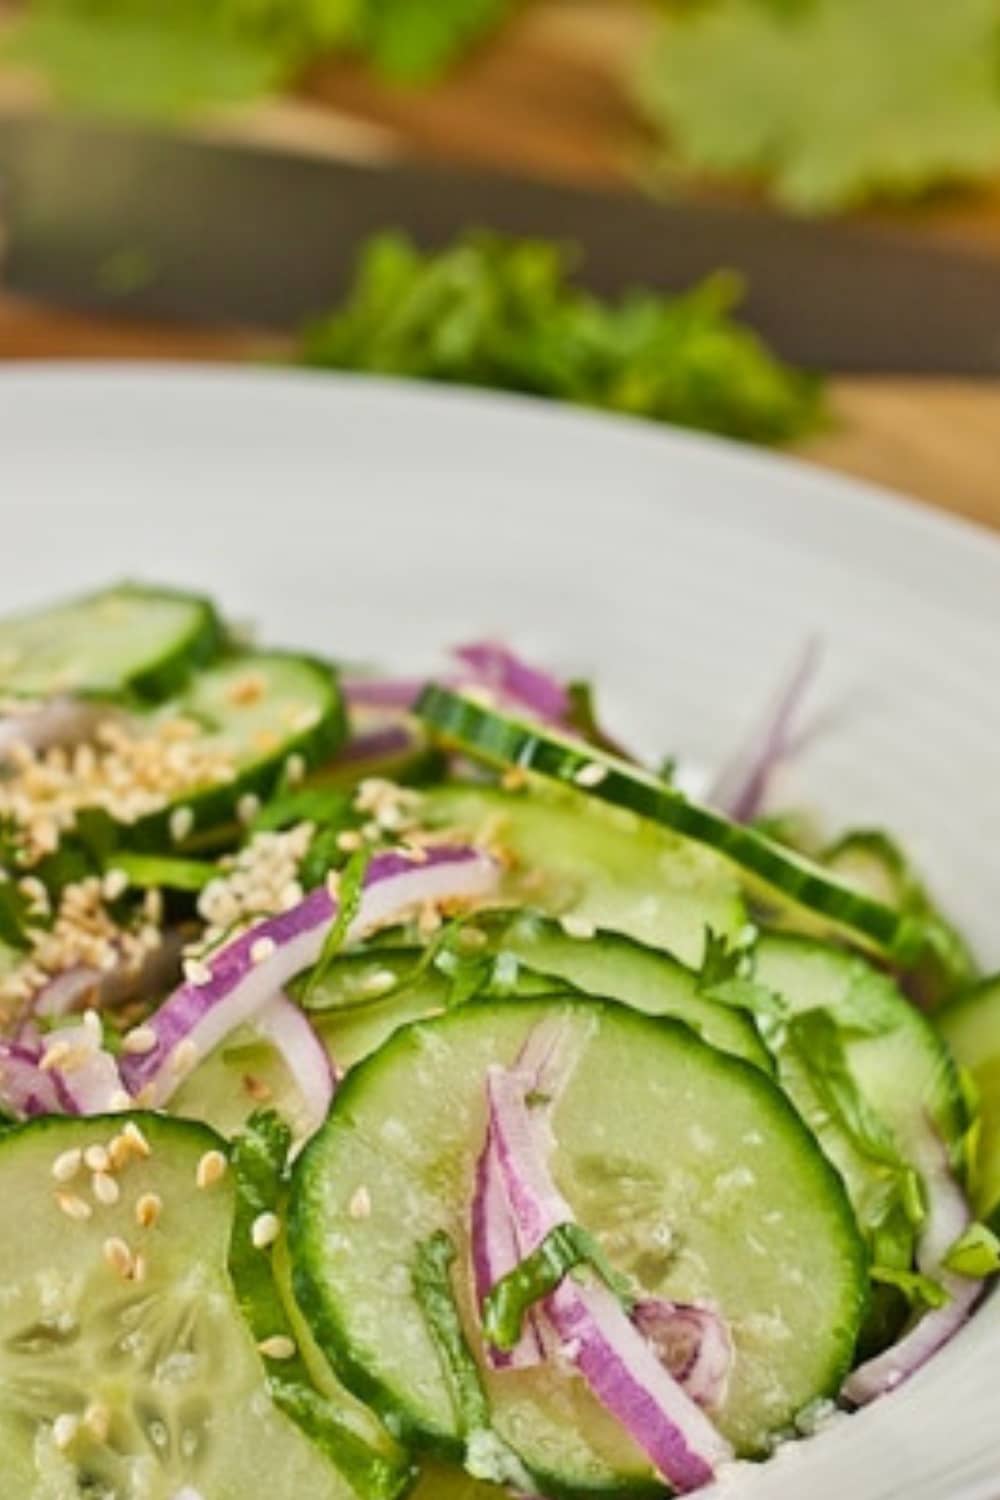 Cucumber Salad With Red Onion and Vinegar